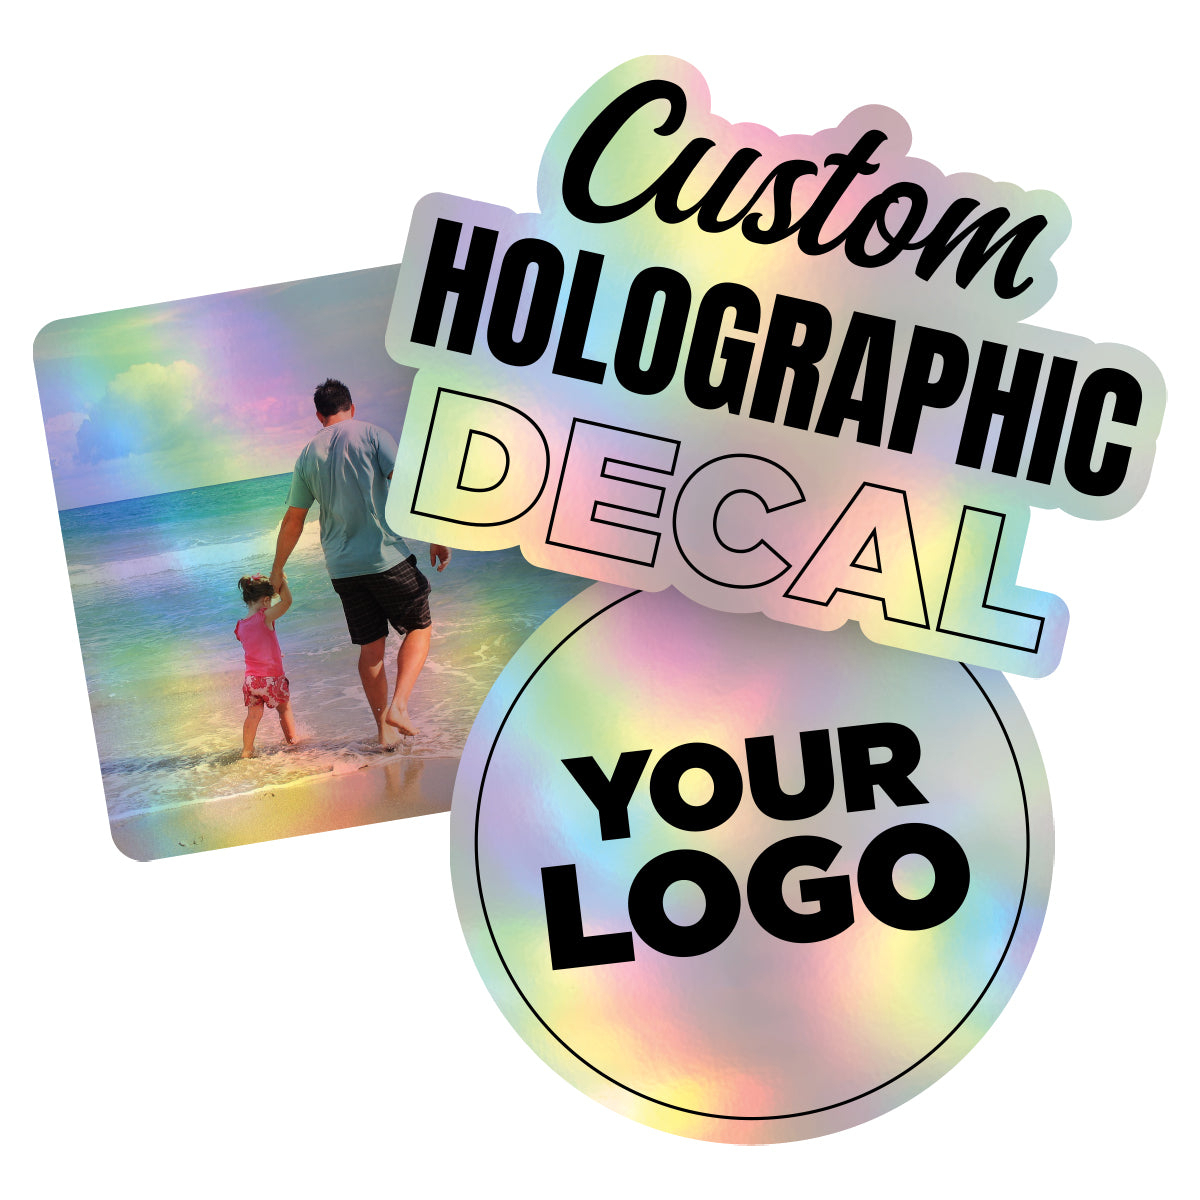 Personalized Holographic Vinyl Sticker Decal Custom Made Any Logo, Image, Text, Or Name Die Cut To Shape - 50 Pack, 2 Inch, Circle